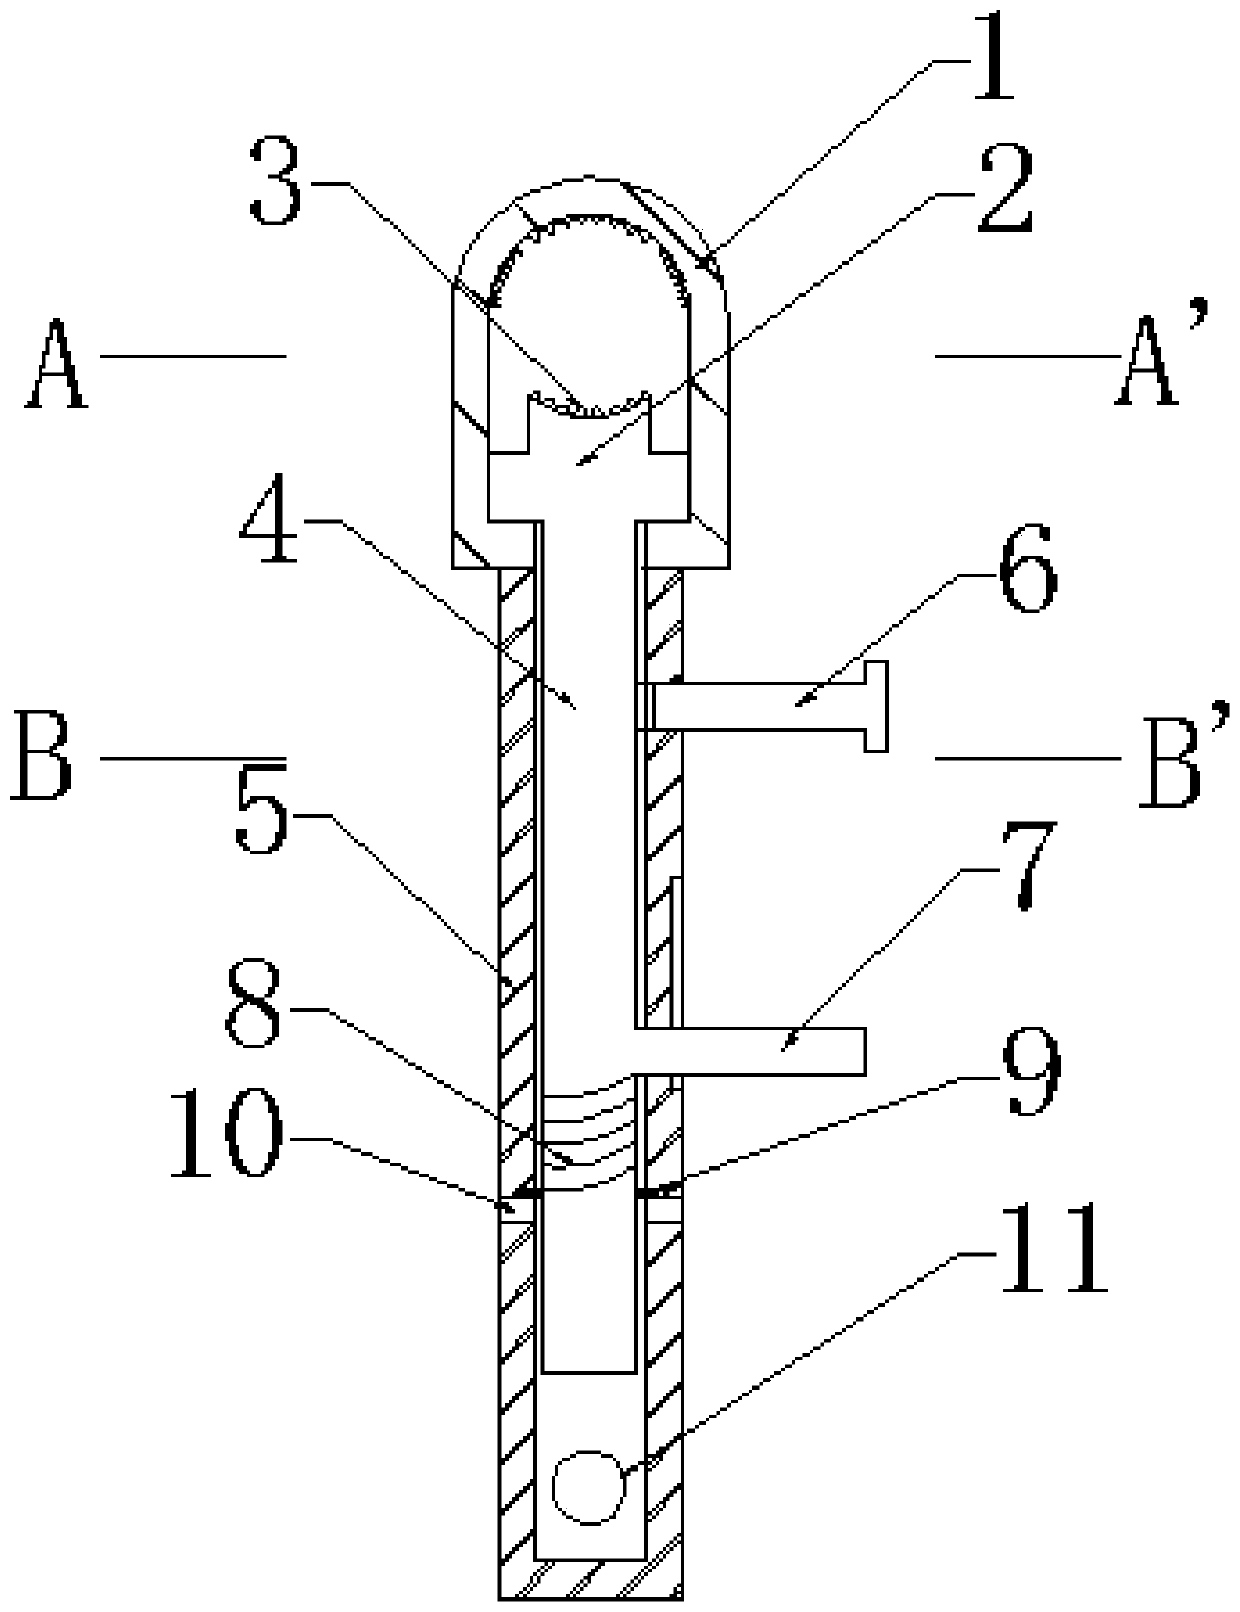 Pipe wrench capable of bidirectionally rotating